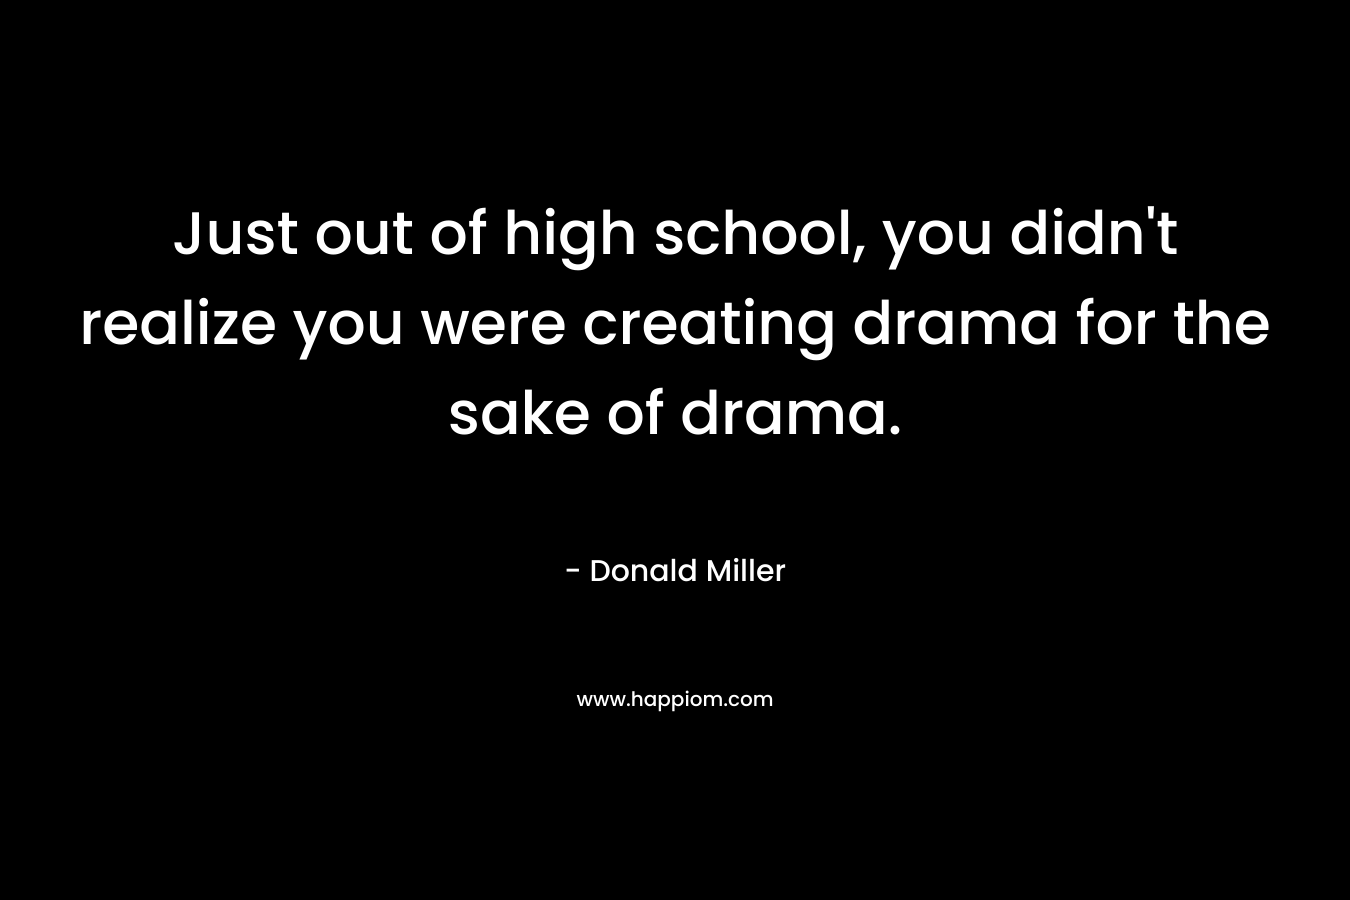 Just out of high school, you didn't realize you were creating drama for the sake of drama.